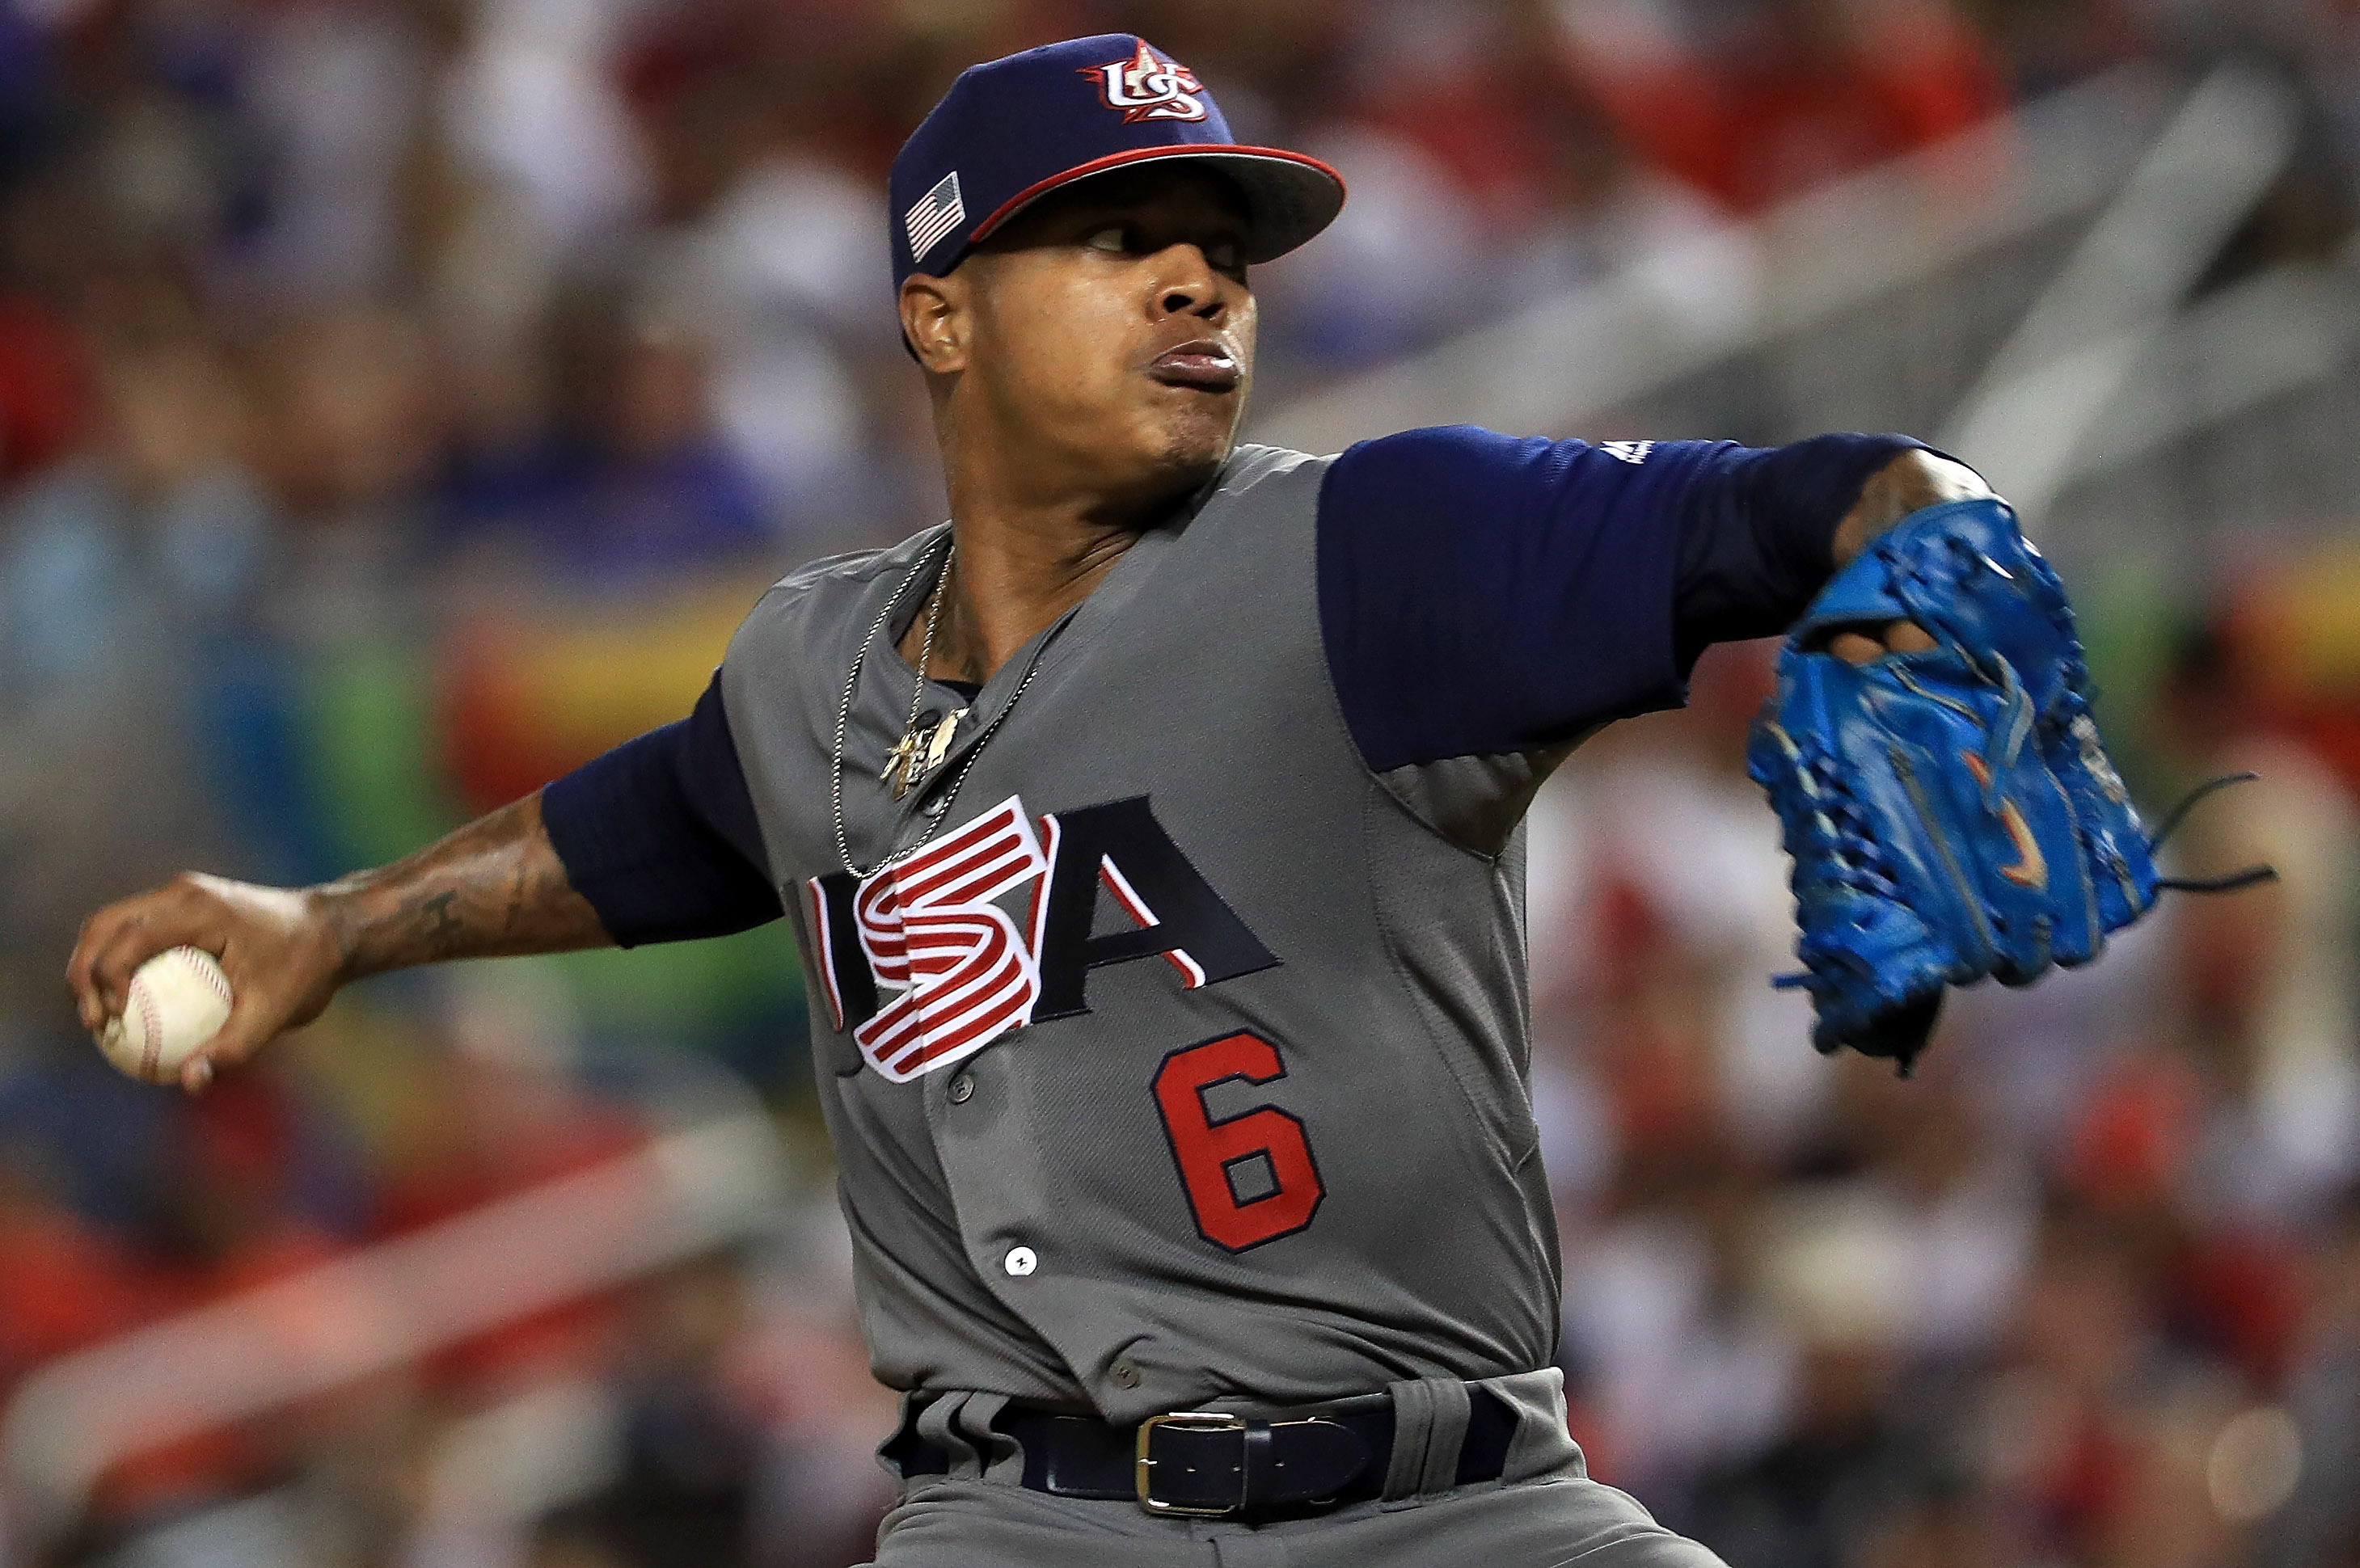 Marcus Stroman strong in final Blue Jays start before WBC – The Denver Post